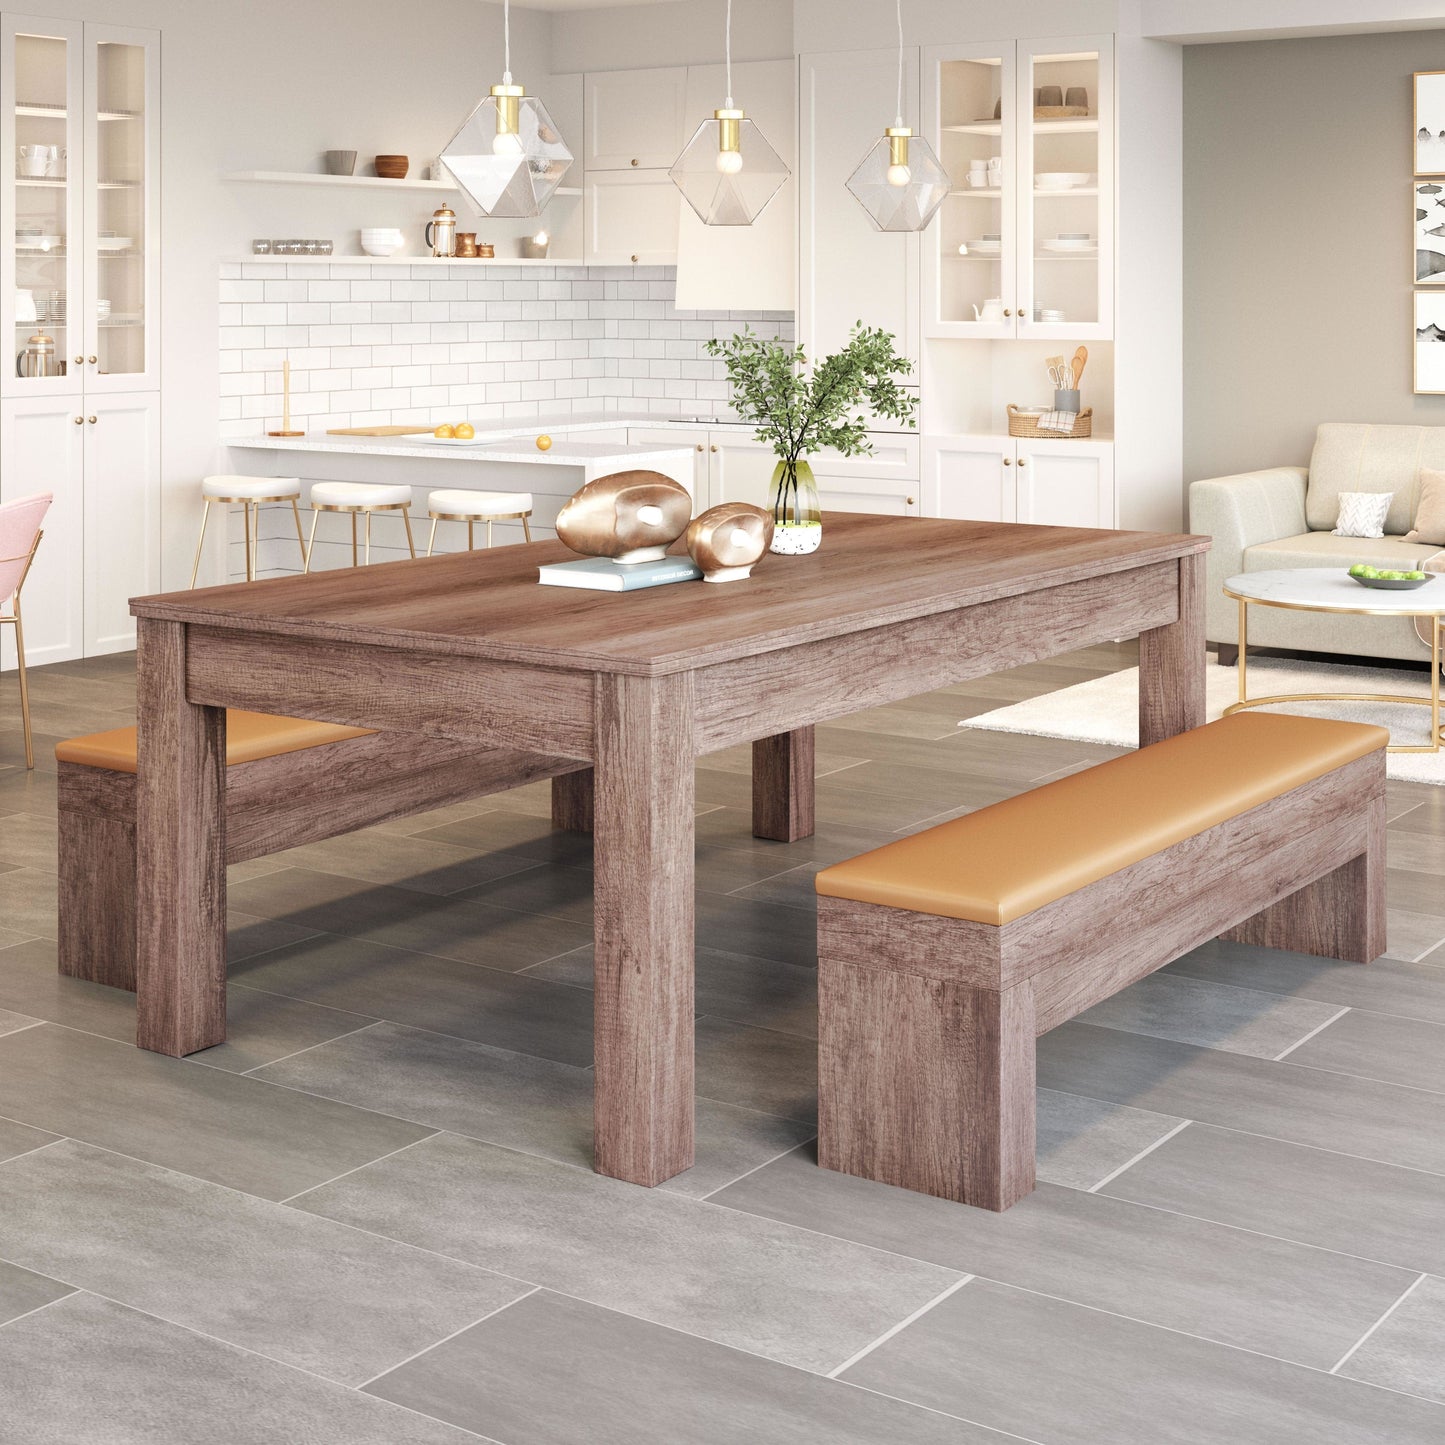 The dining top becomes the perfect place for a family meal.